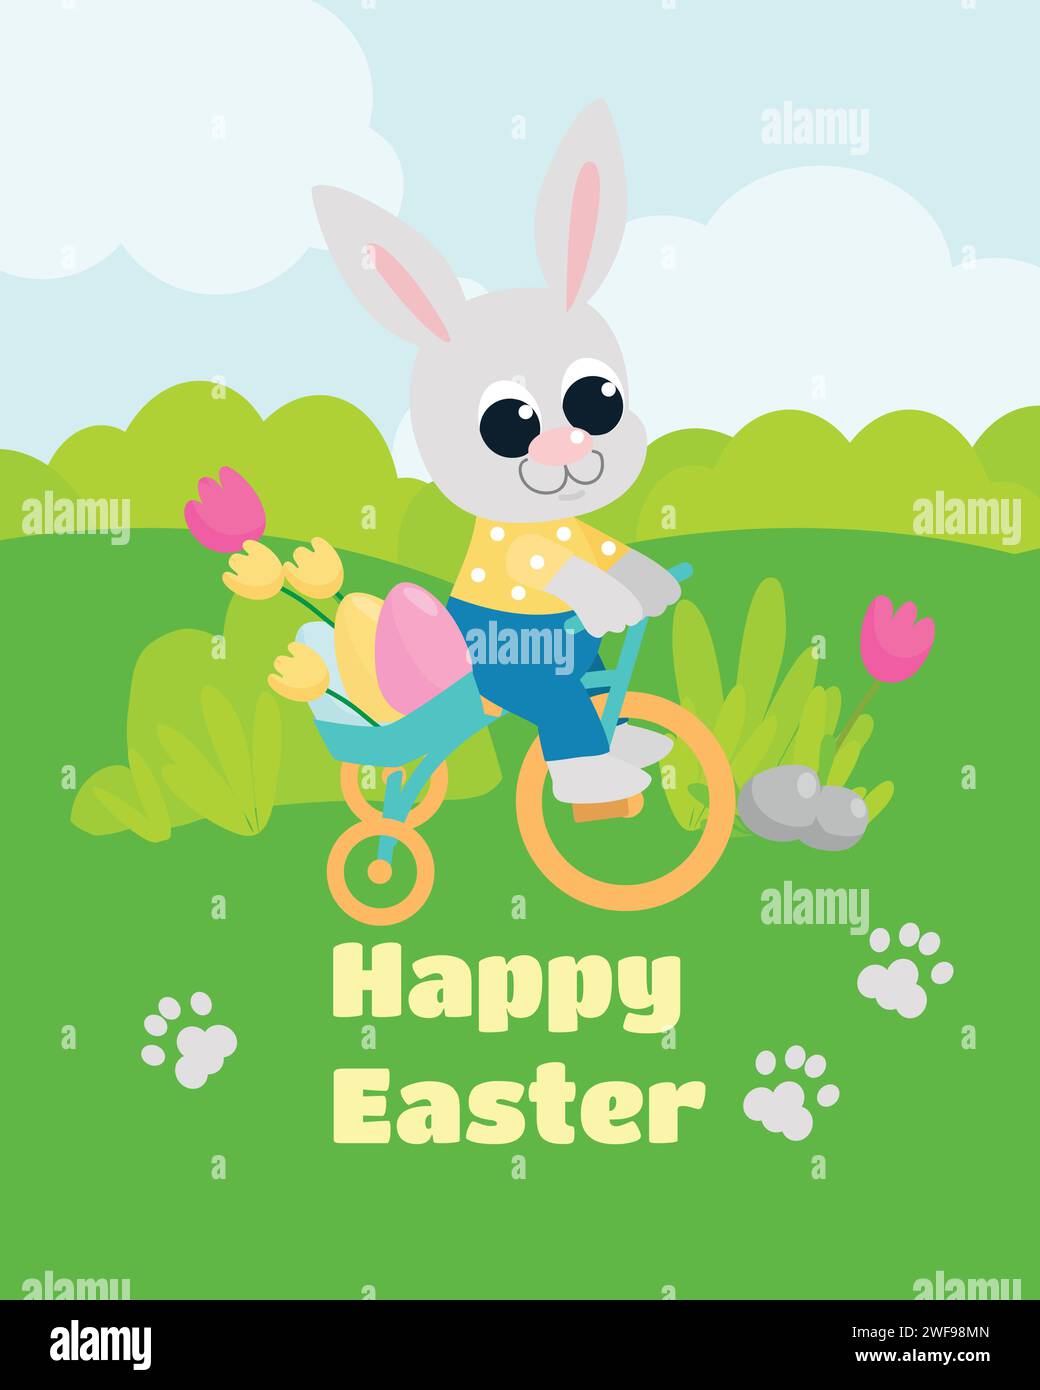 Easter card. Easter spring illustration of a cute bunny on a bicycle. Bunny in cartoon style. Stock Vector